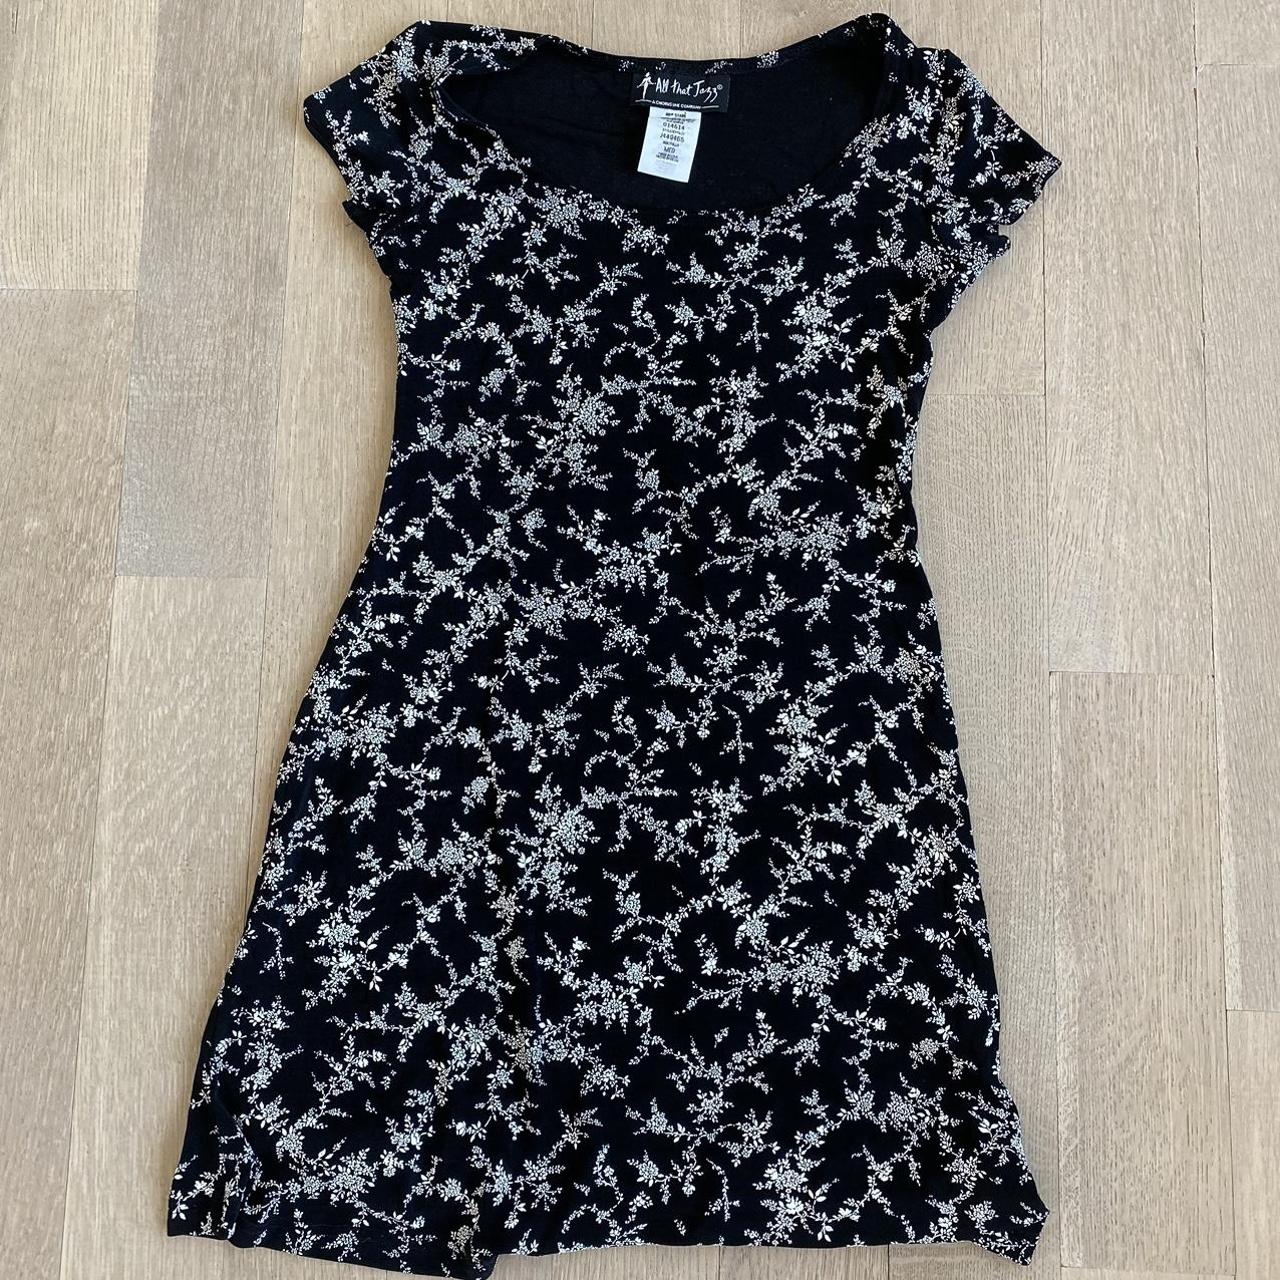 90s/y2k All That Jazz black and white floral mini... - Depop